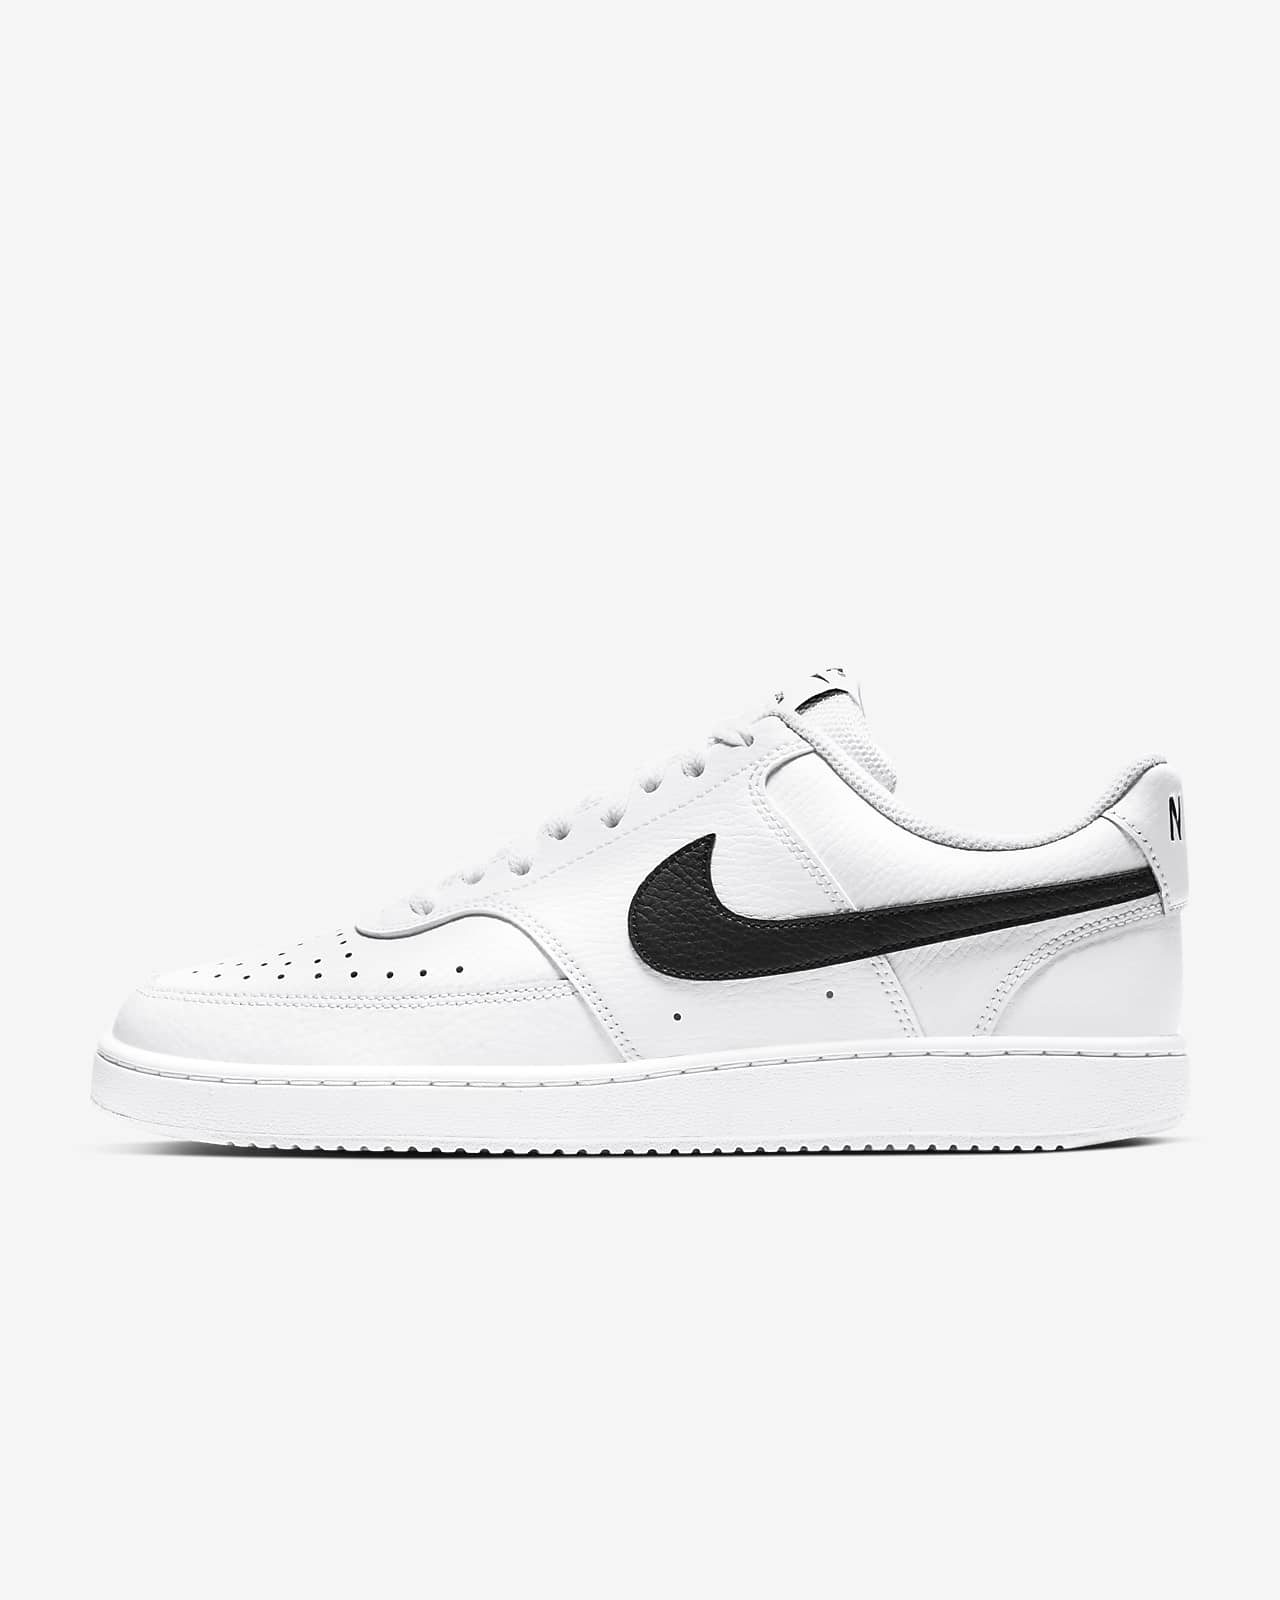 nike white court shoes